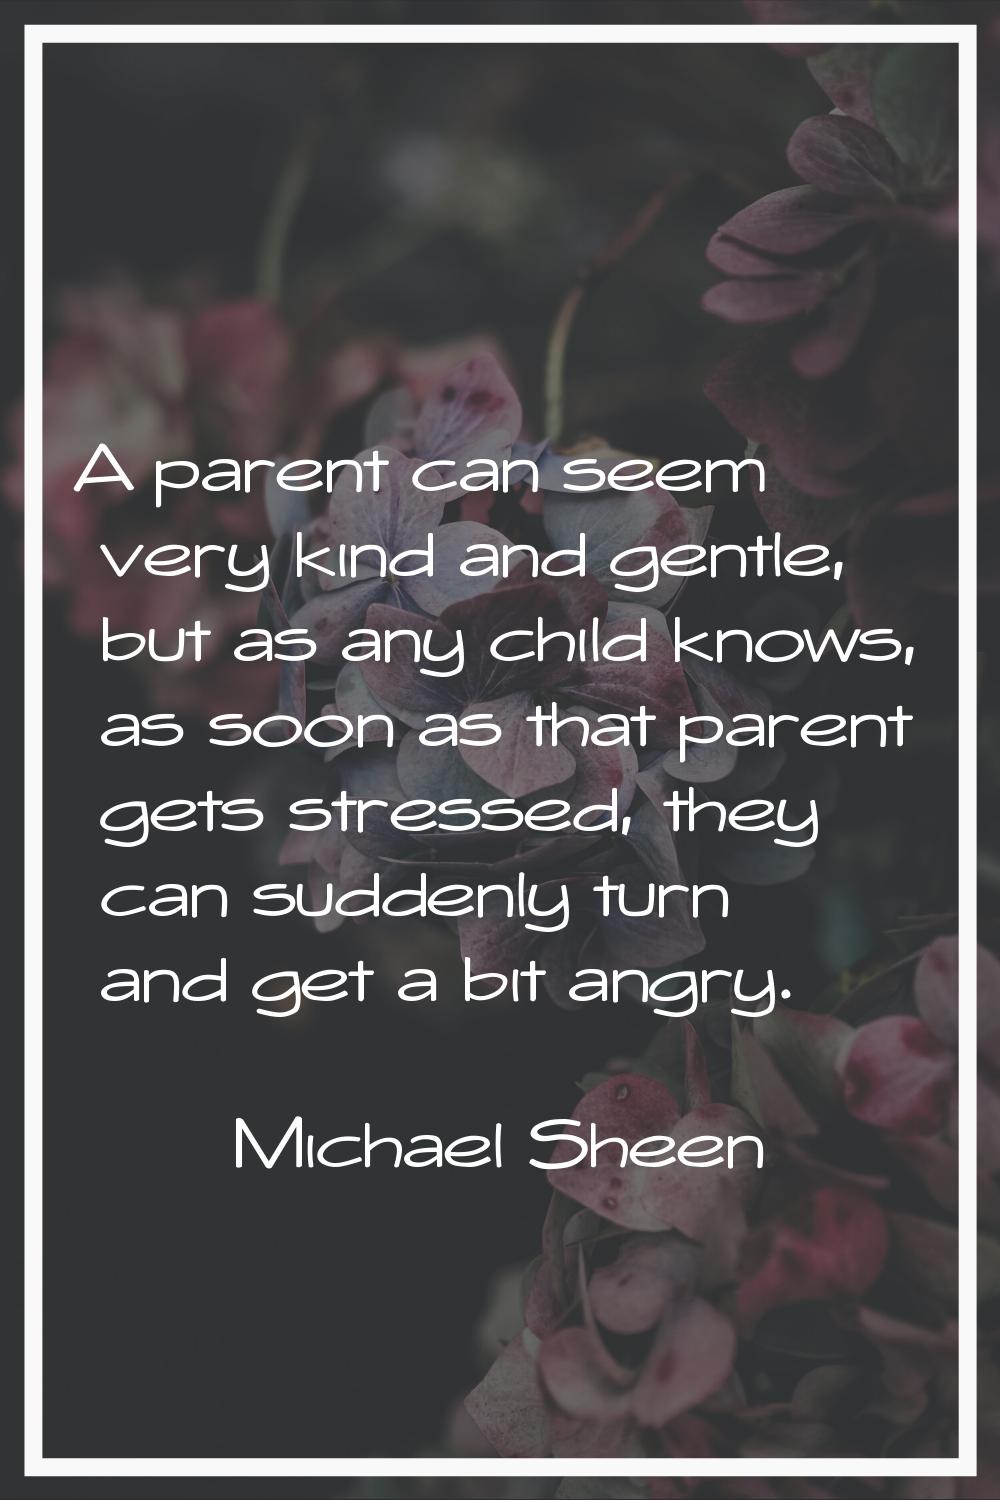 A parent can seem very kind and gentle, but as any child knows, as soon as that parent gets stresse